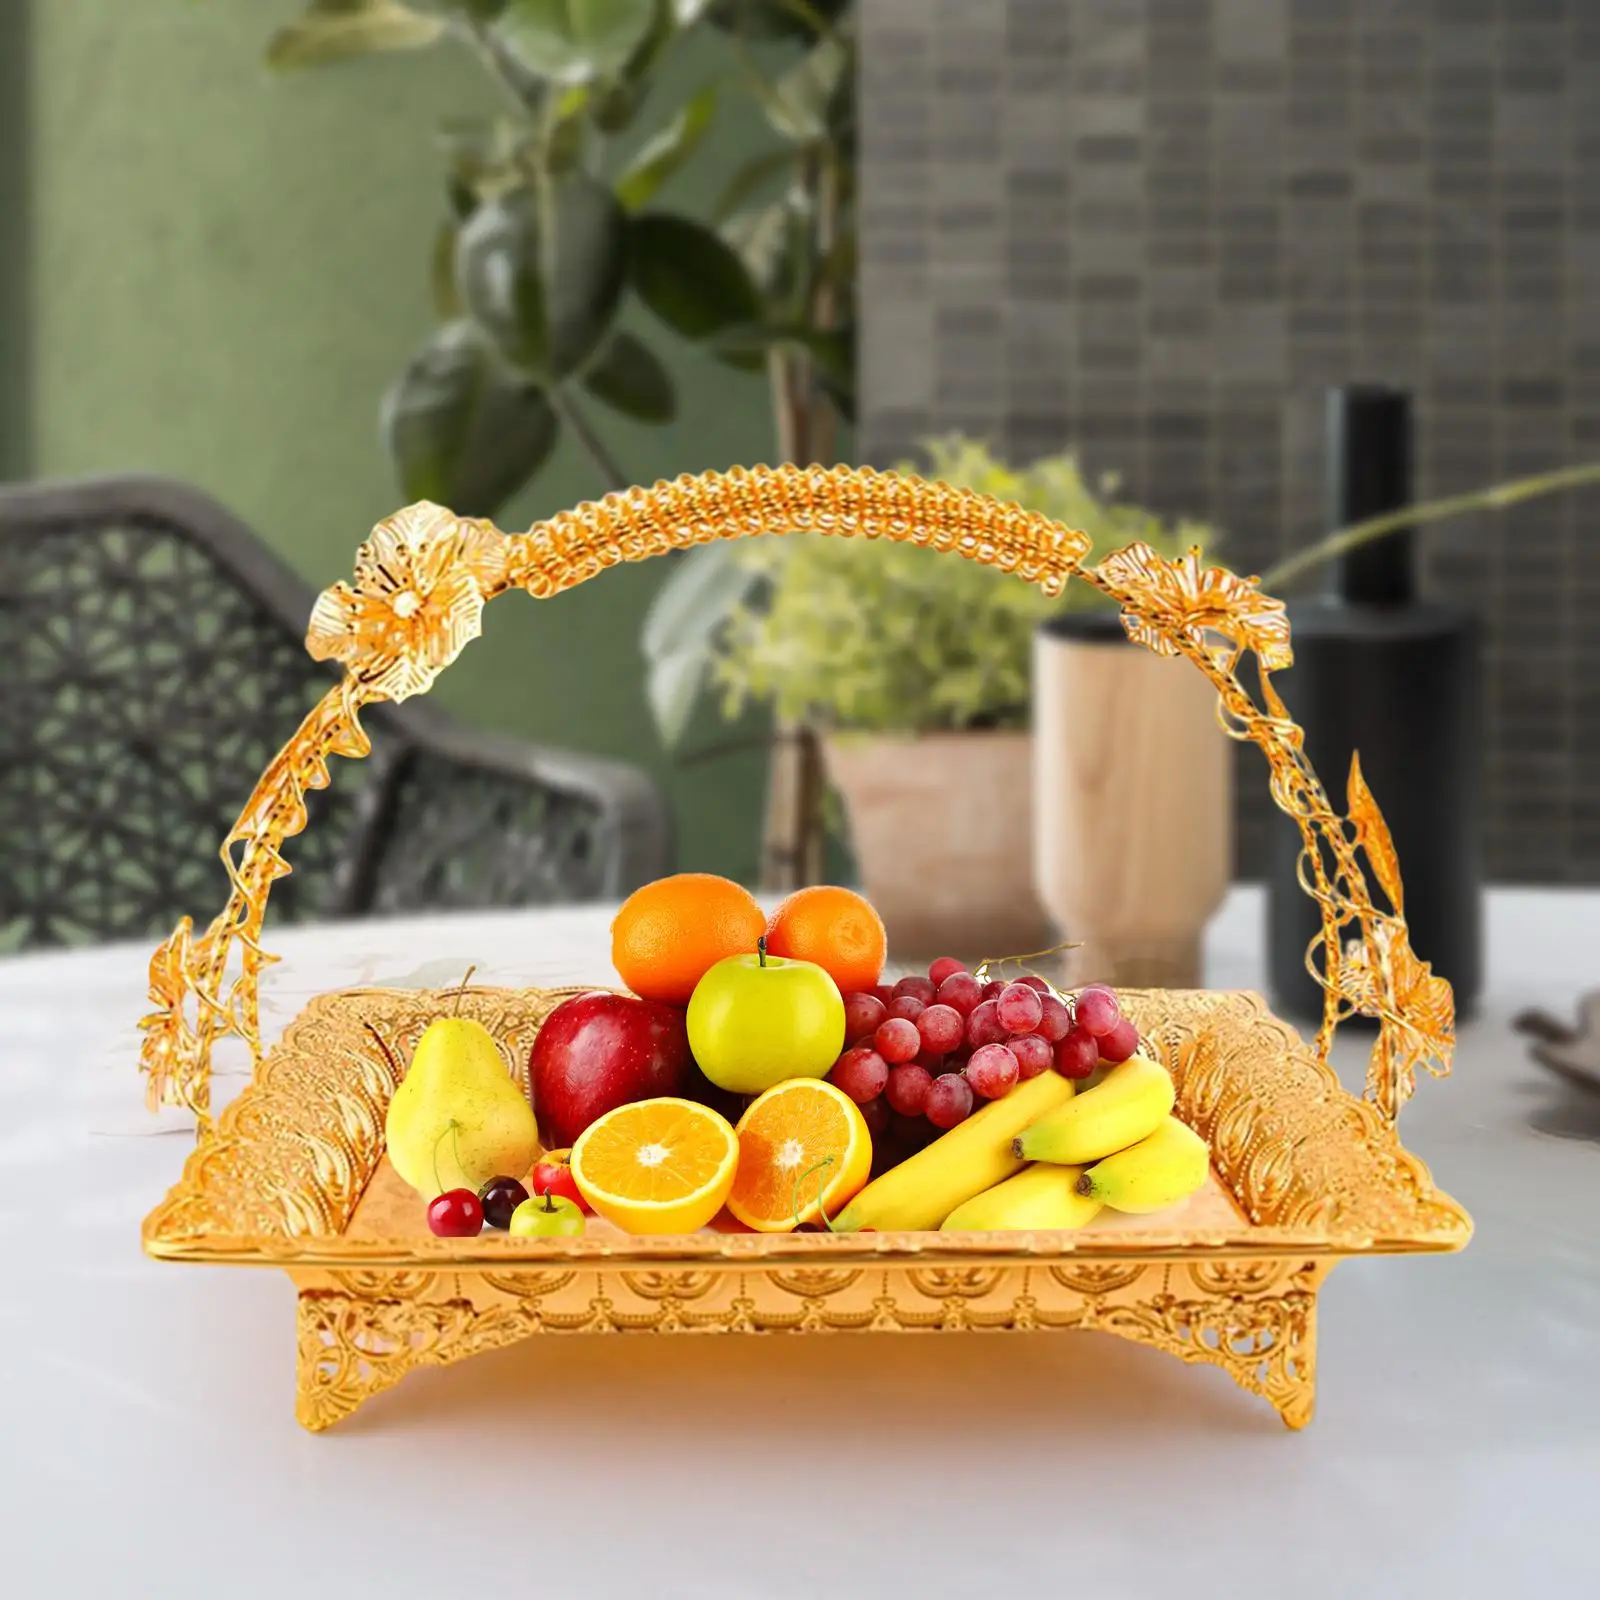 Fruit Tray Cupcake Dessert Party Display Crafts Iron for Centerpiece